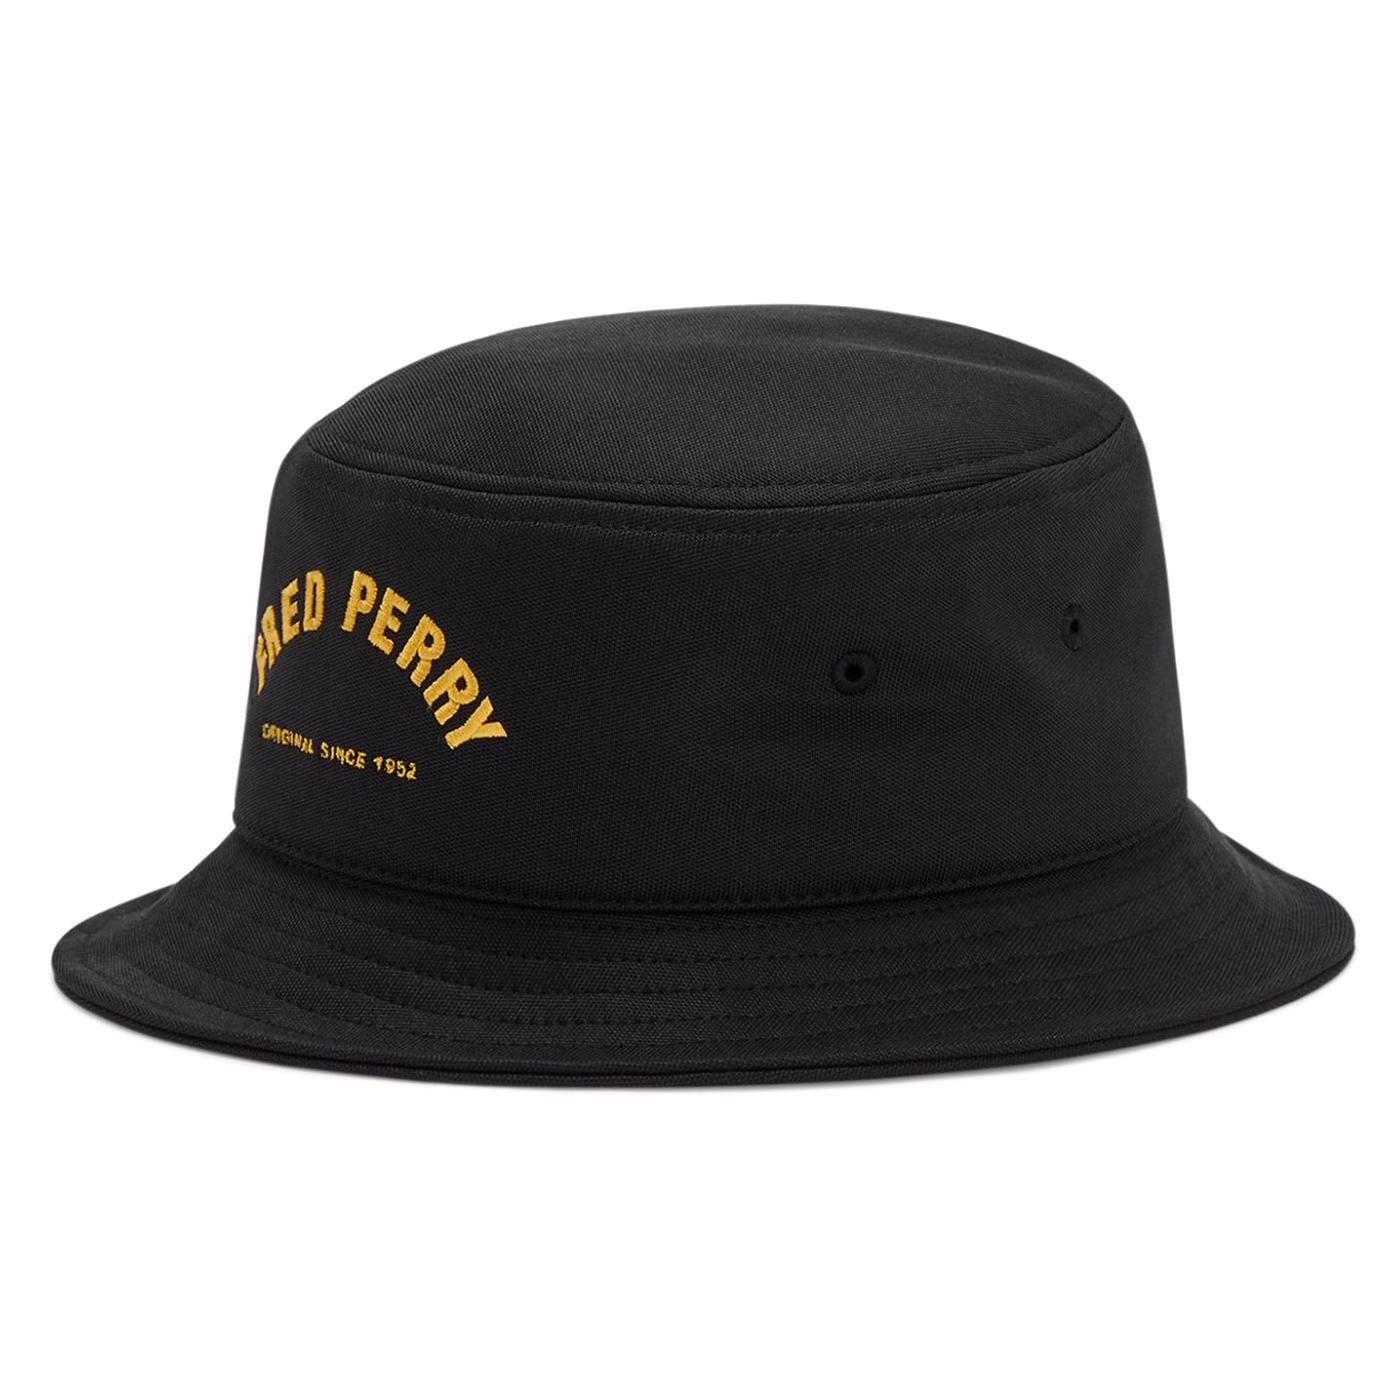 FRED PERRY Arch Branded Tricot Retro Bucket Hat in Black